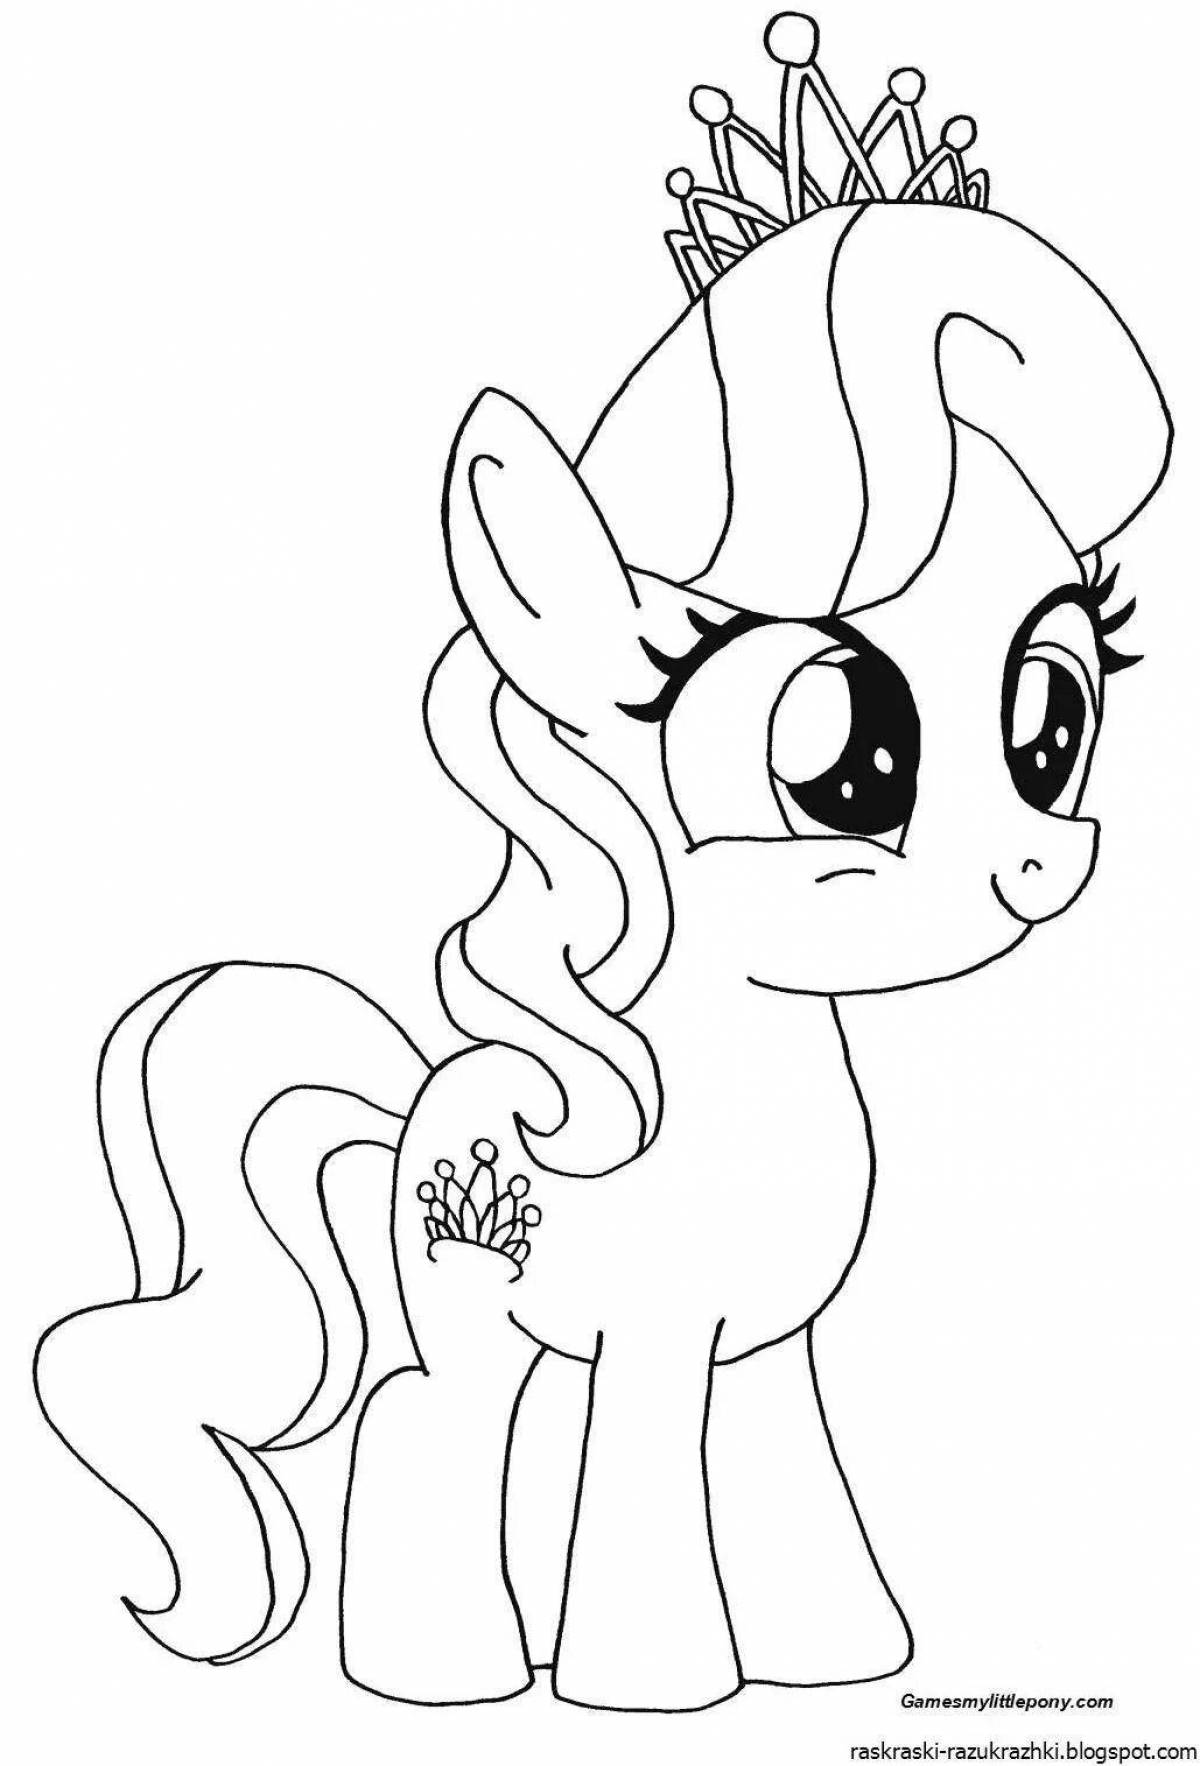 Majestic baby pony coloring page